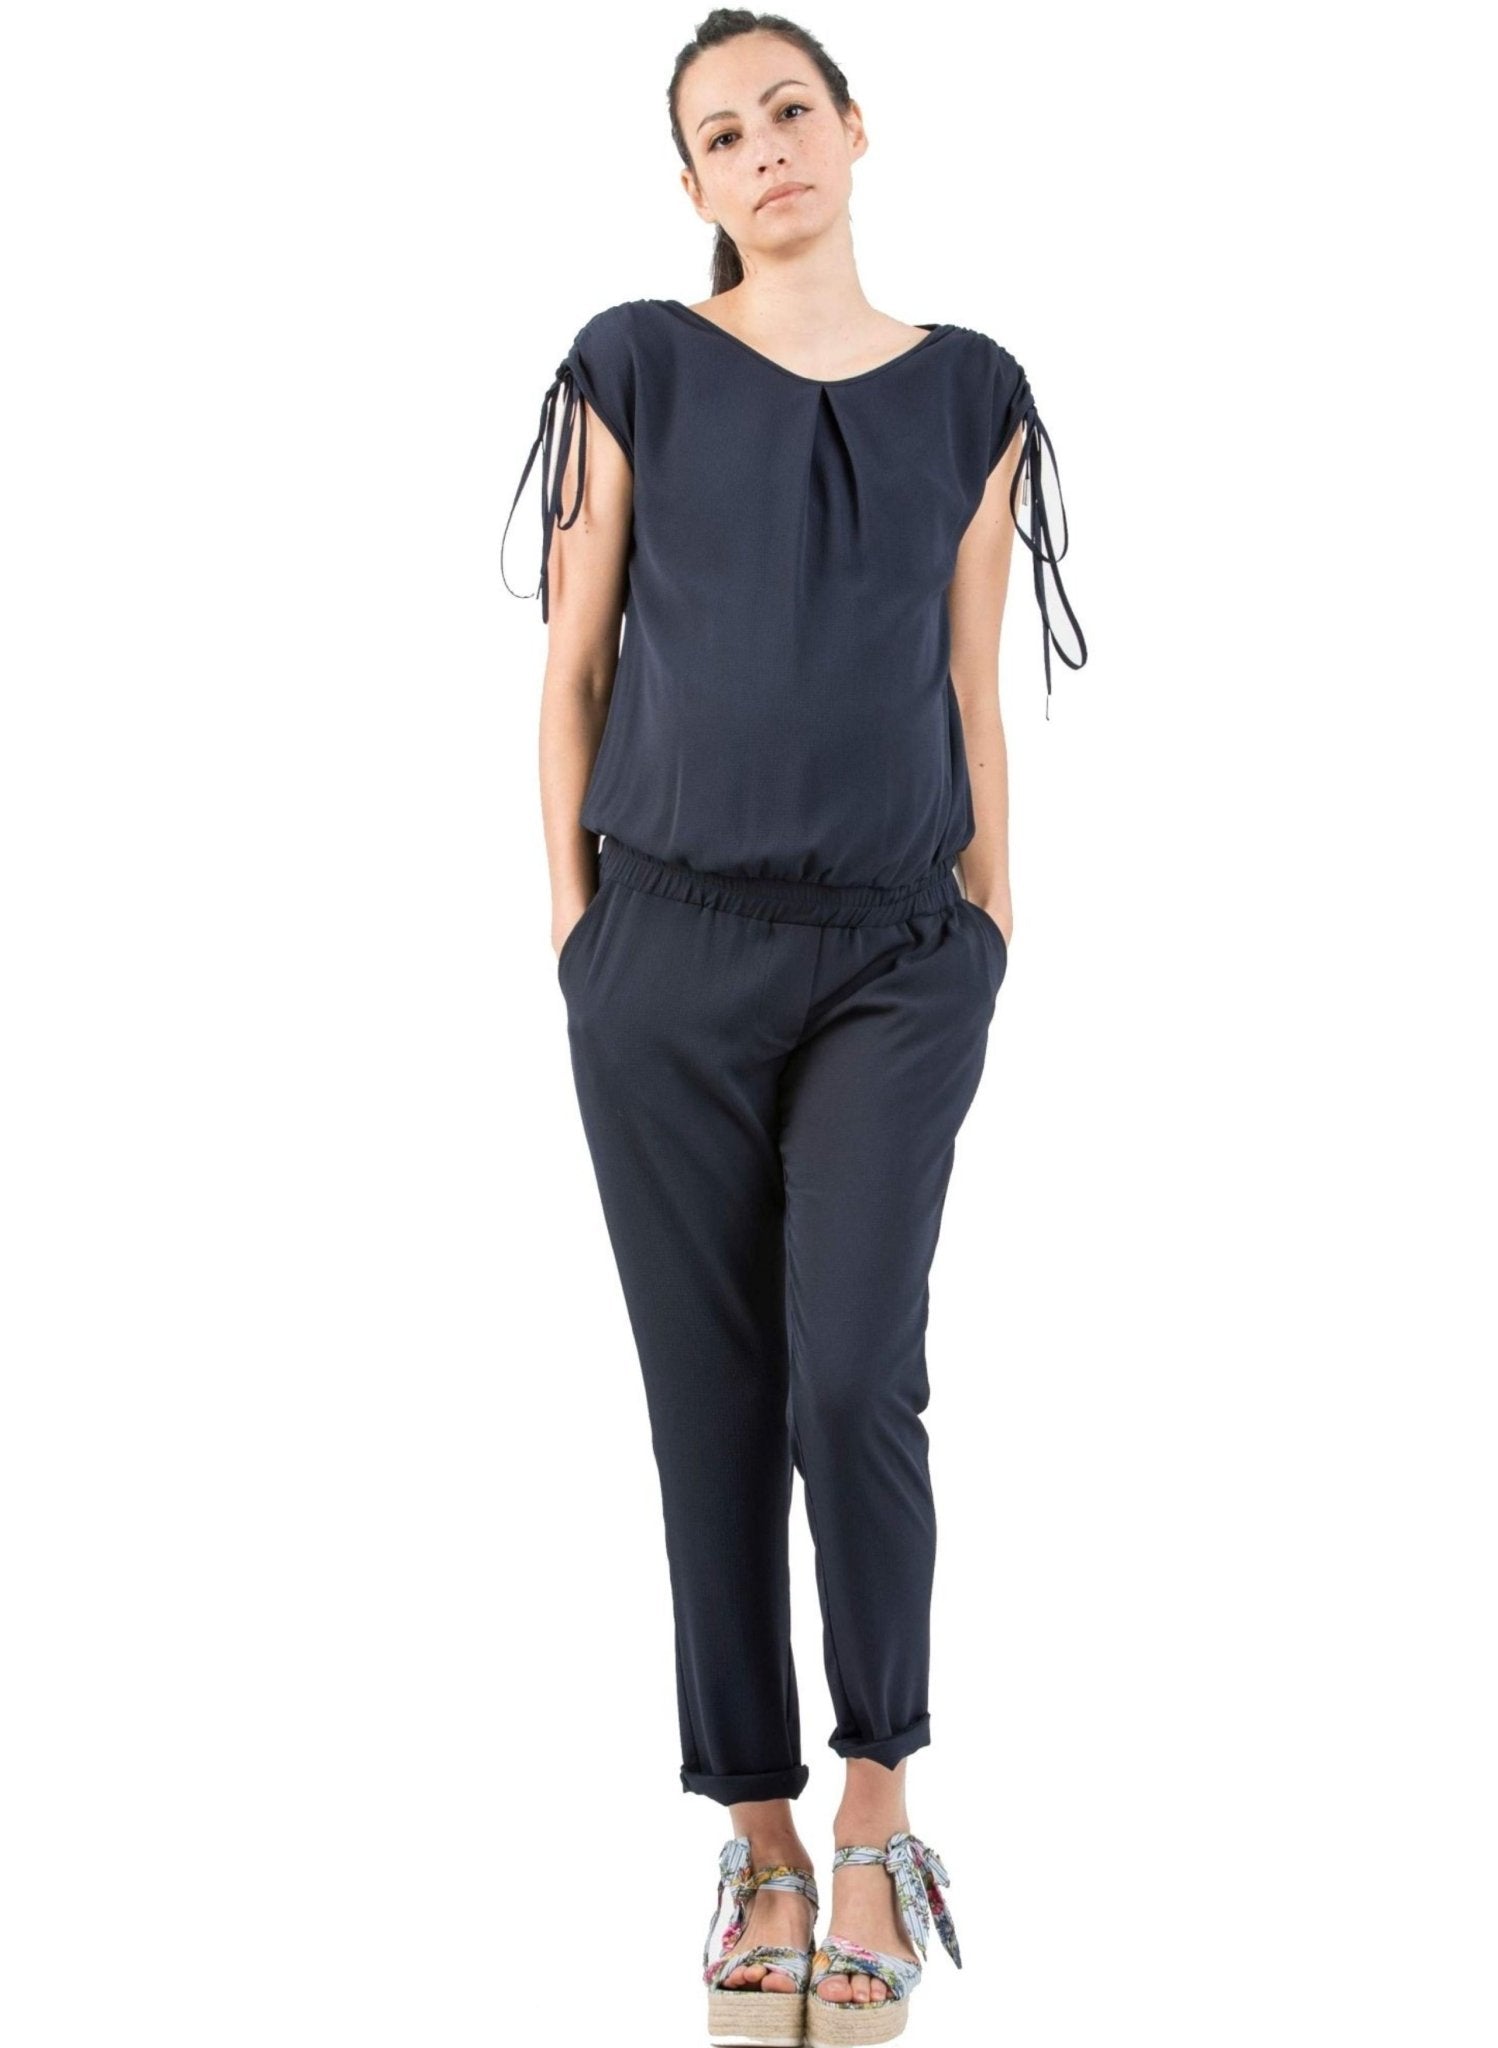 Maternity Jumpsuit with Shoulder Detail - Mums and Bumps